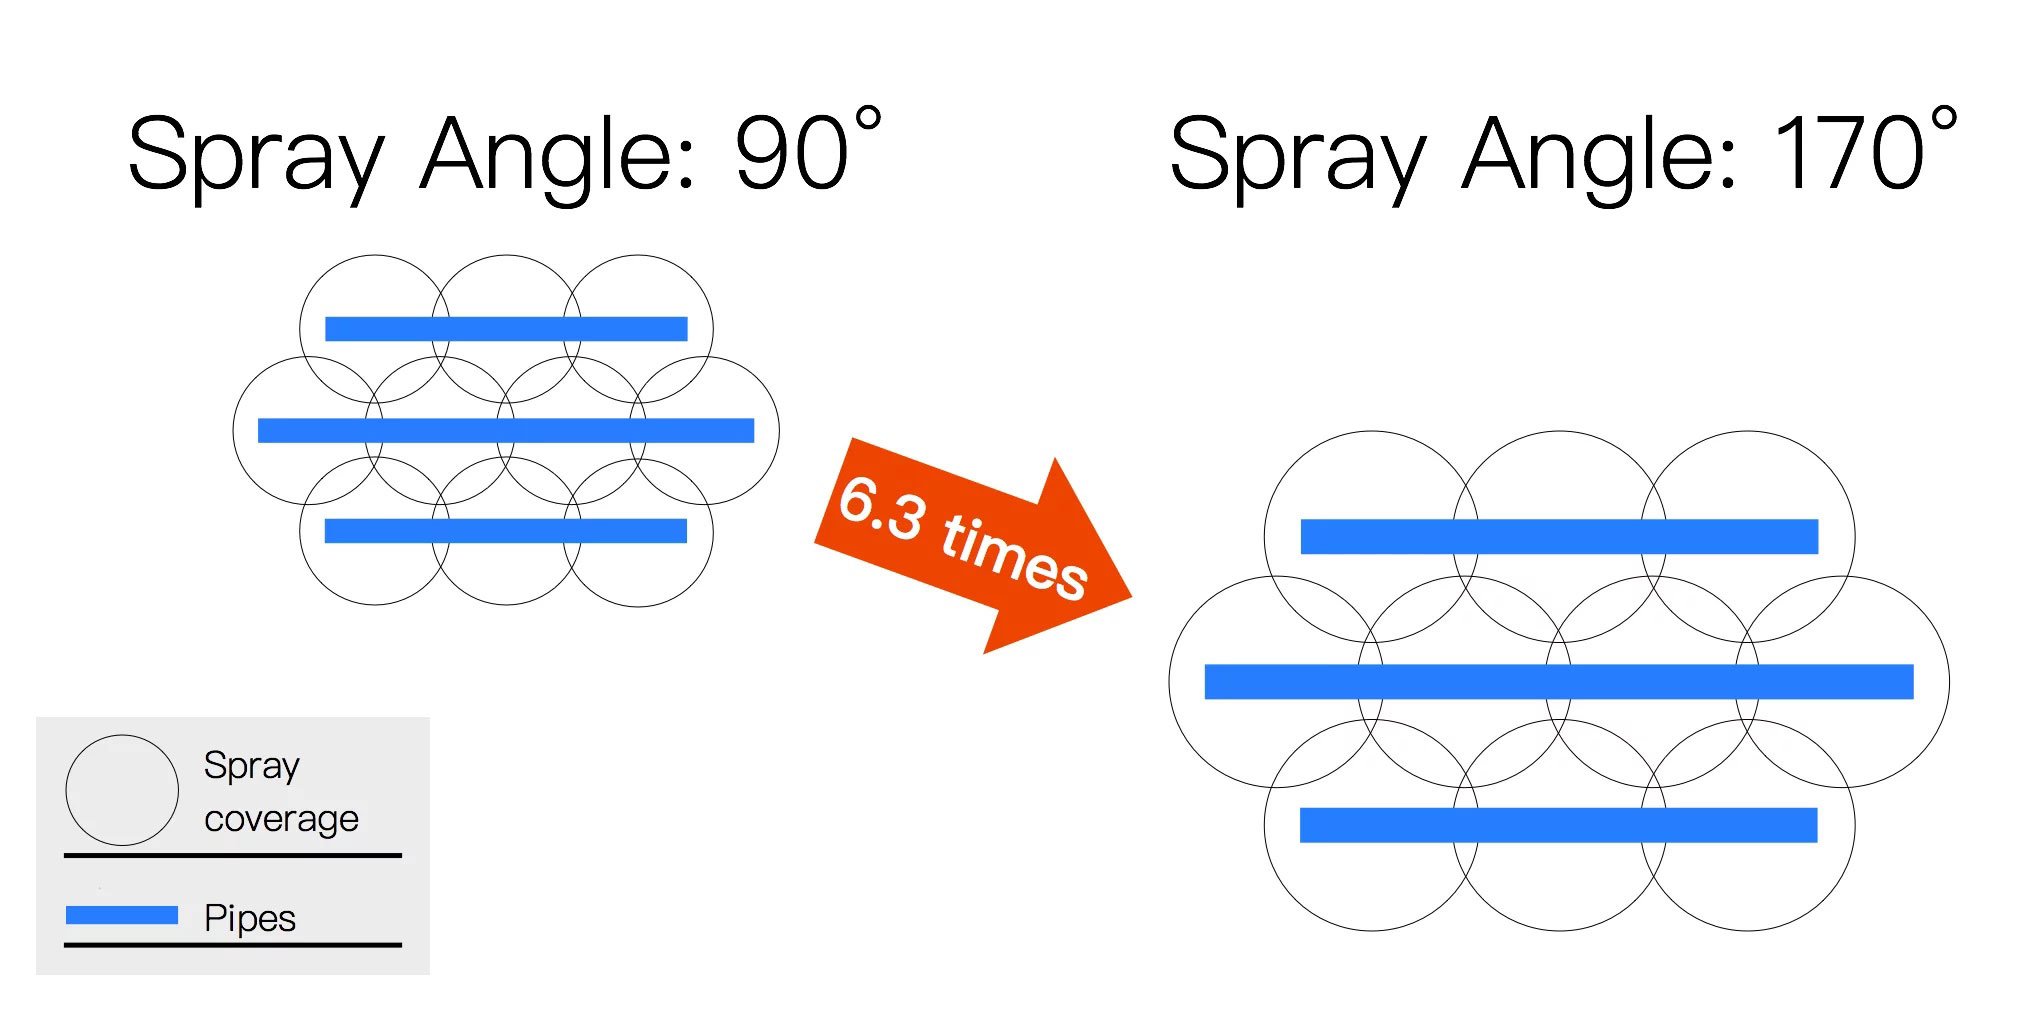 Spray angle and coverage